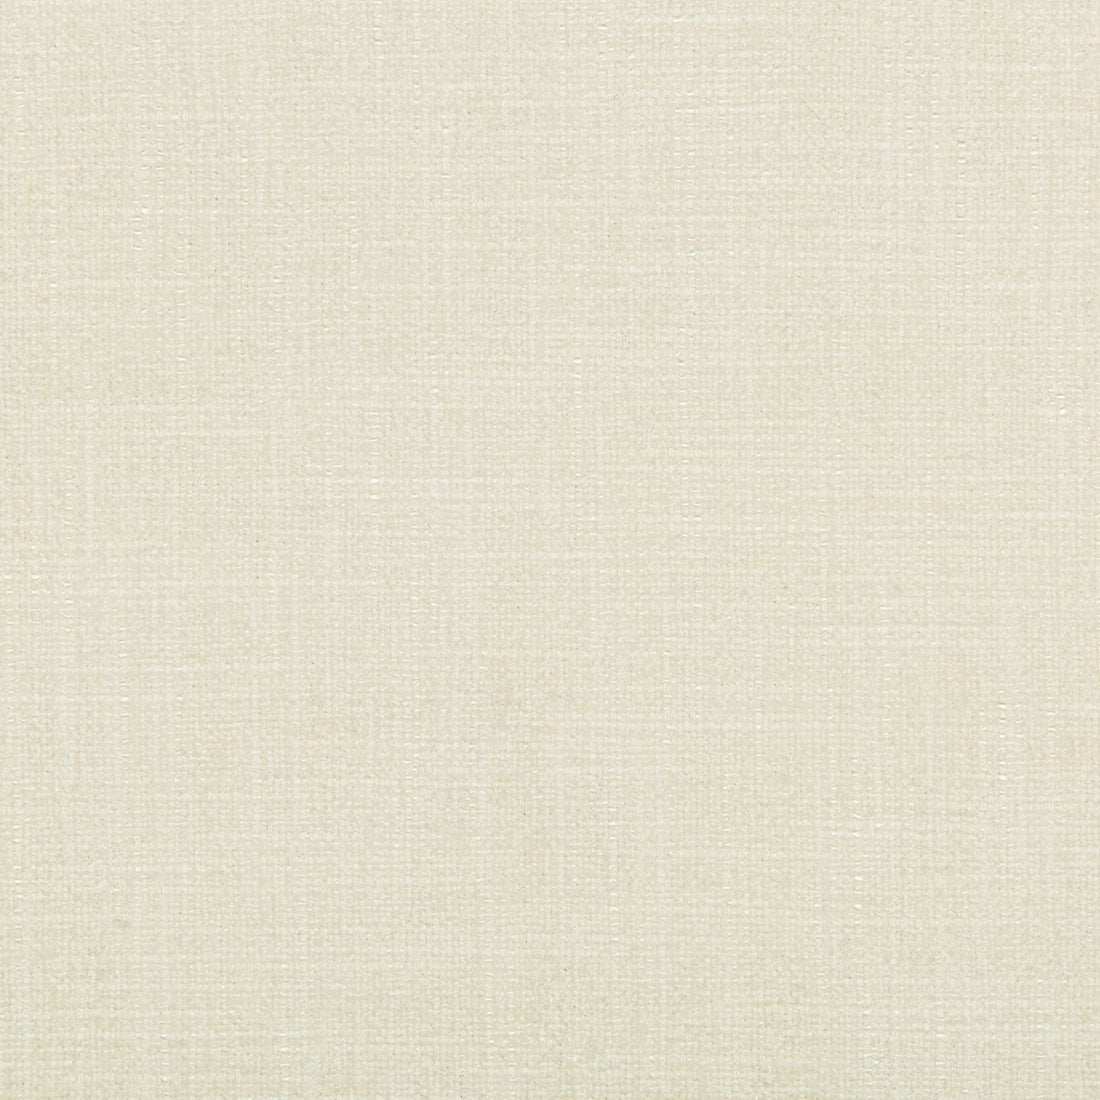 Allstar fabric in ivory color - pattern 34299.1.0 - by Kravet Basics in the Sarah Richardson Harmony collection